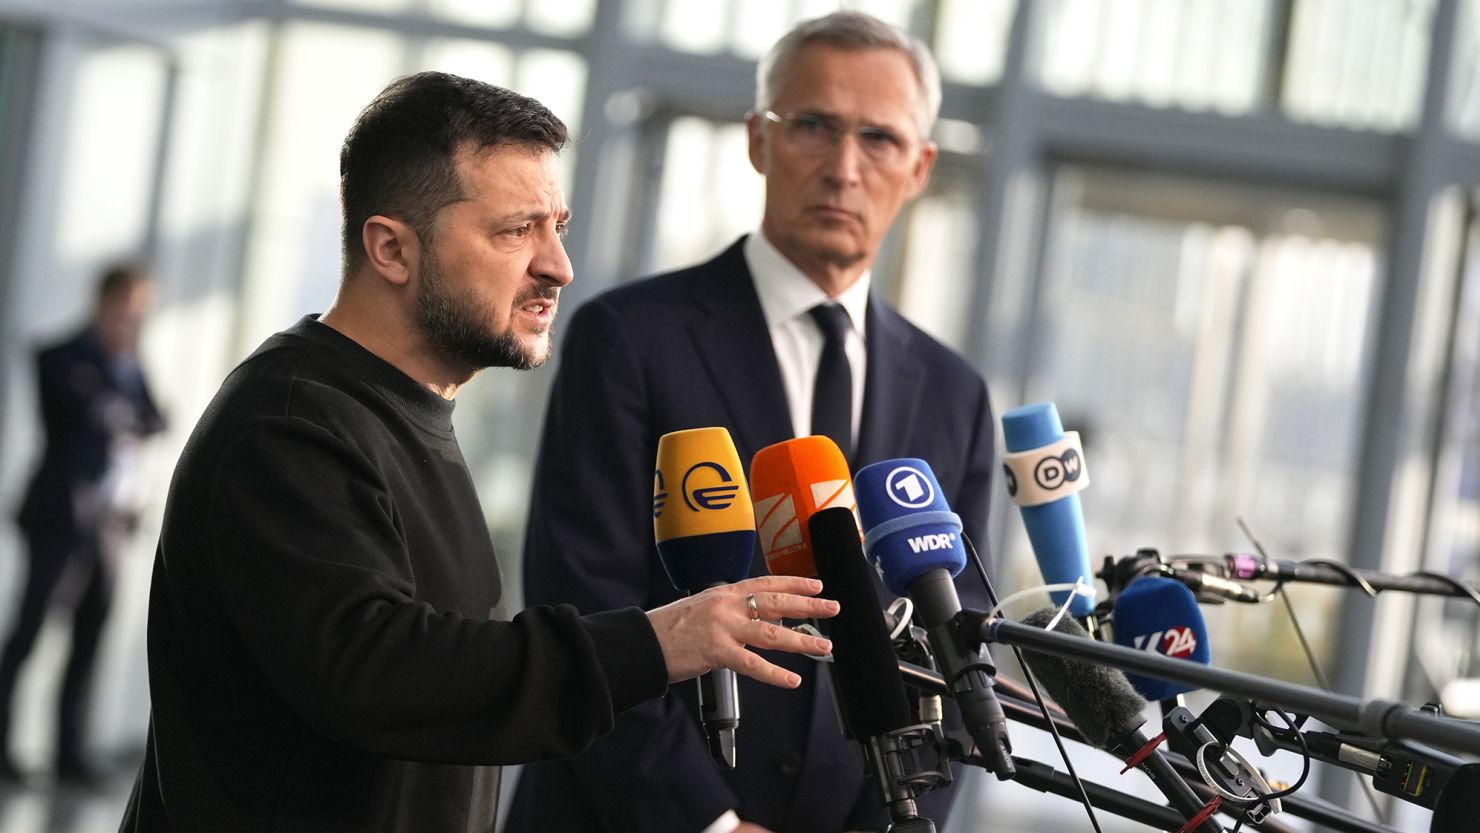 Ukraine's President Volodymyr Zelenskyy, left, speaks during a media conference with NATO Secretary General Jens Stoltenberg prior to a meeting of NATO defense ministers at NATO headquarters in Brussels on Wednesday.